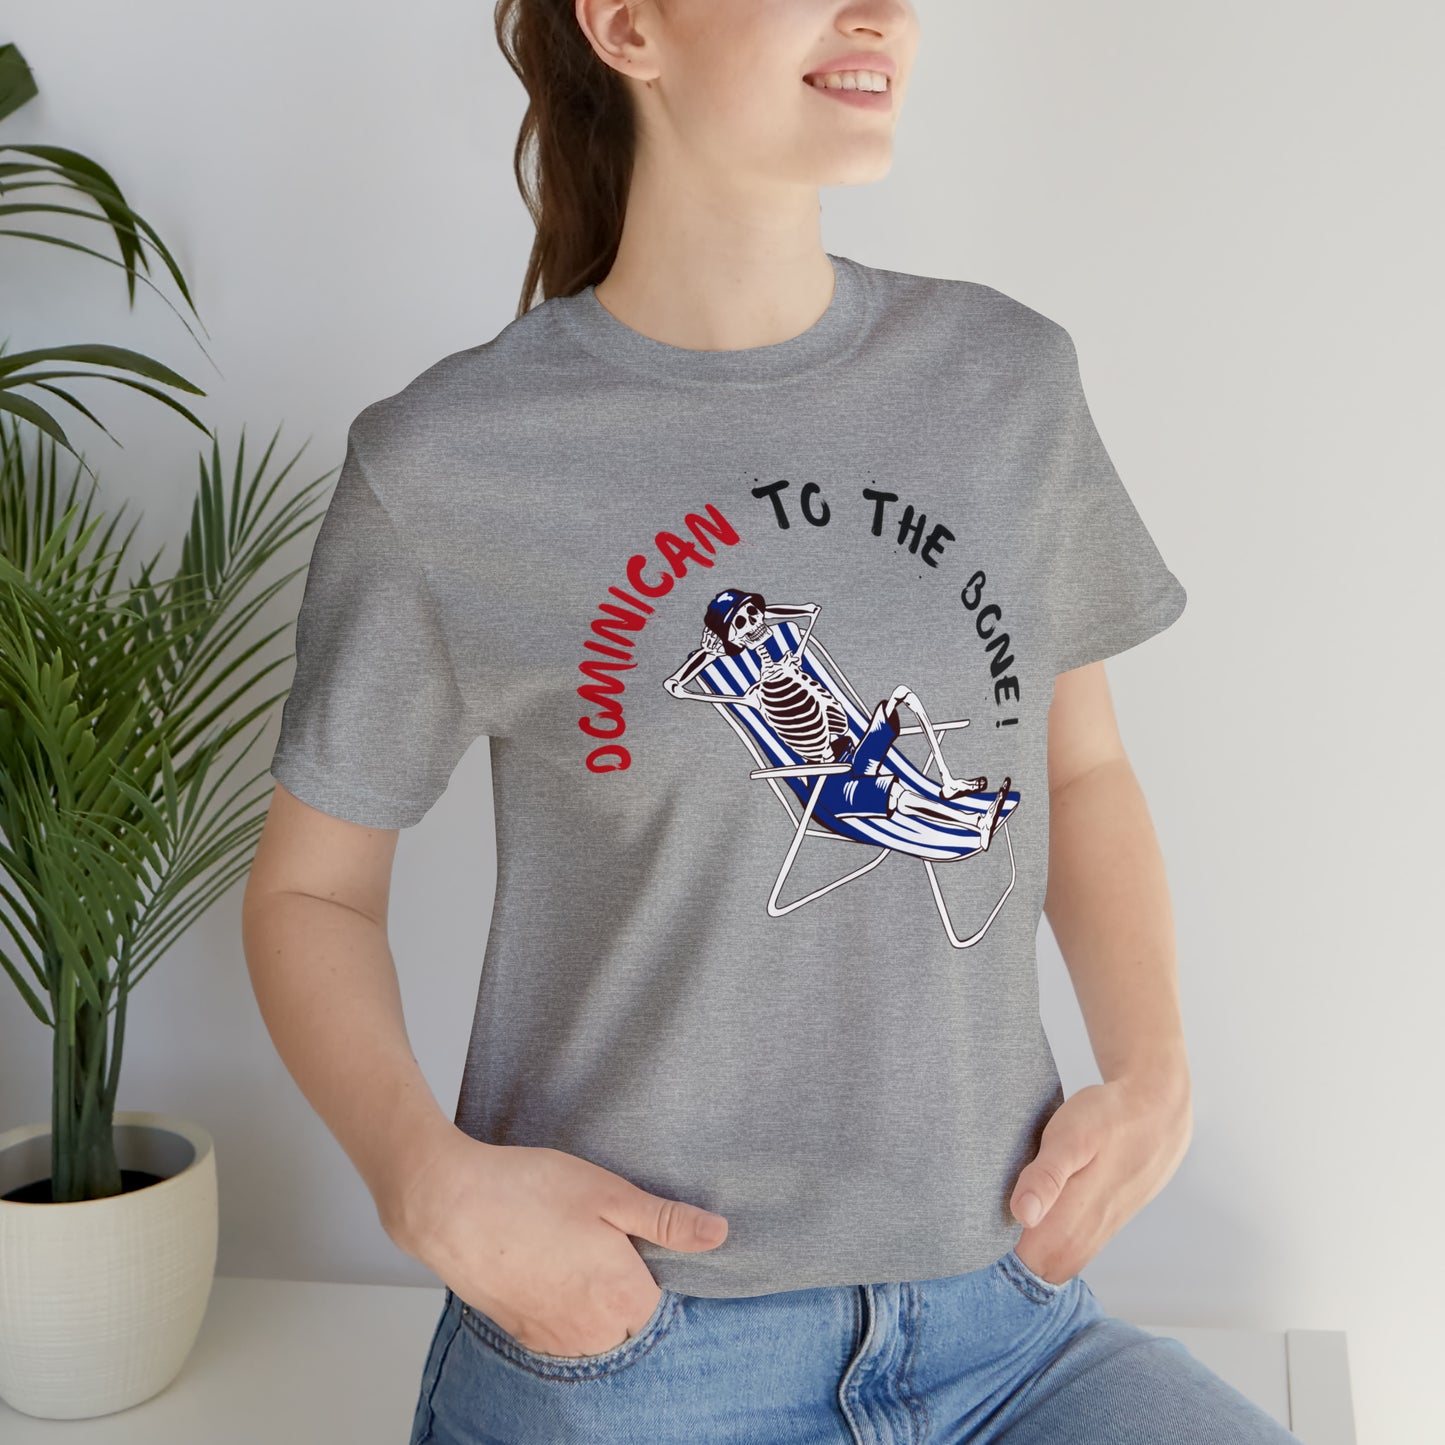 Dominican To The Bone - Unisex Jersey Short Sleeve Tee